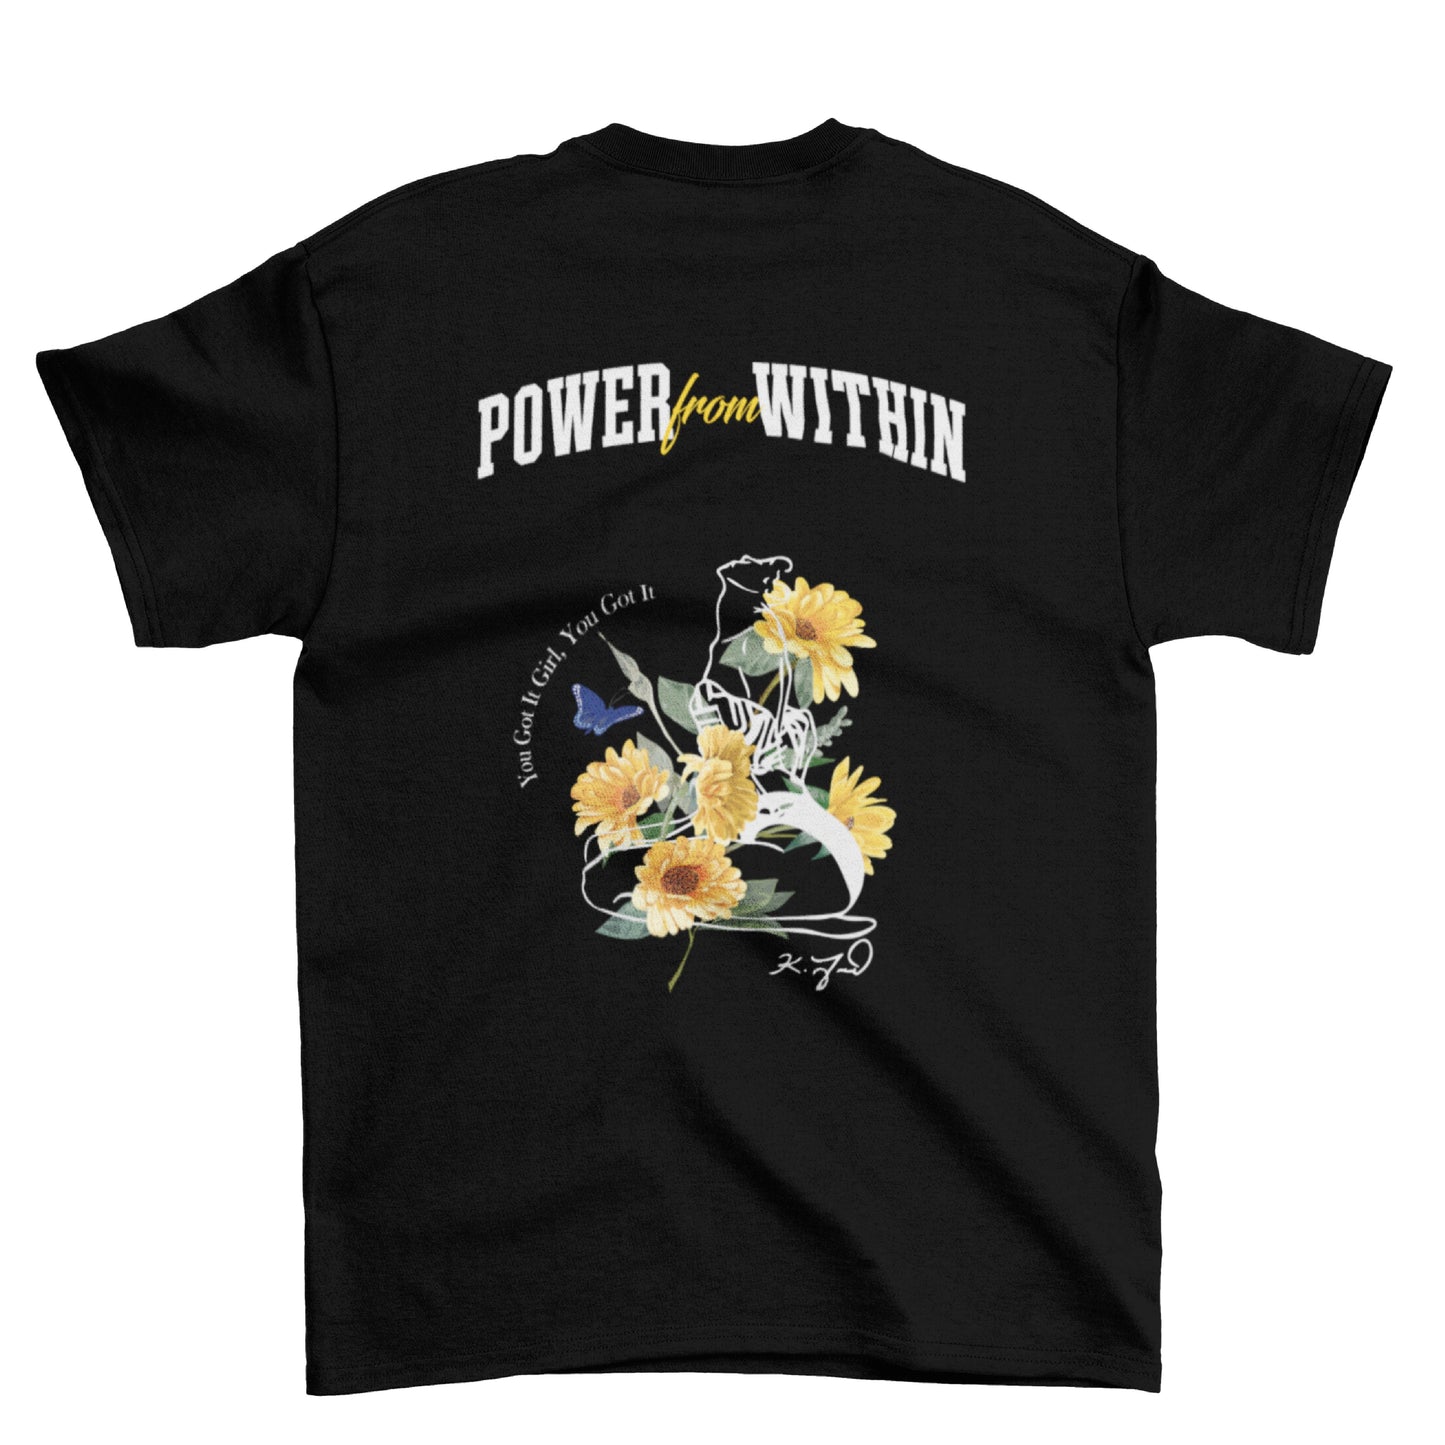 "POWER FROM WITHIN" TEE (BLACK)